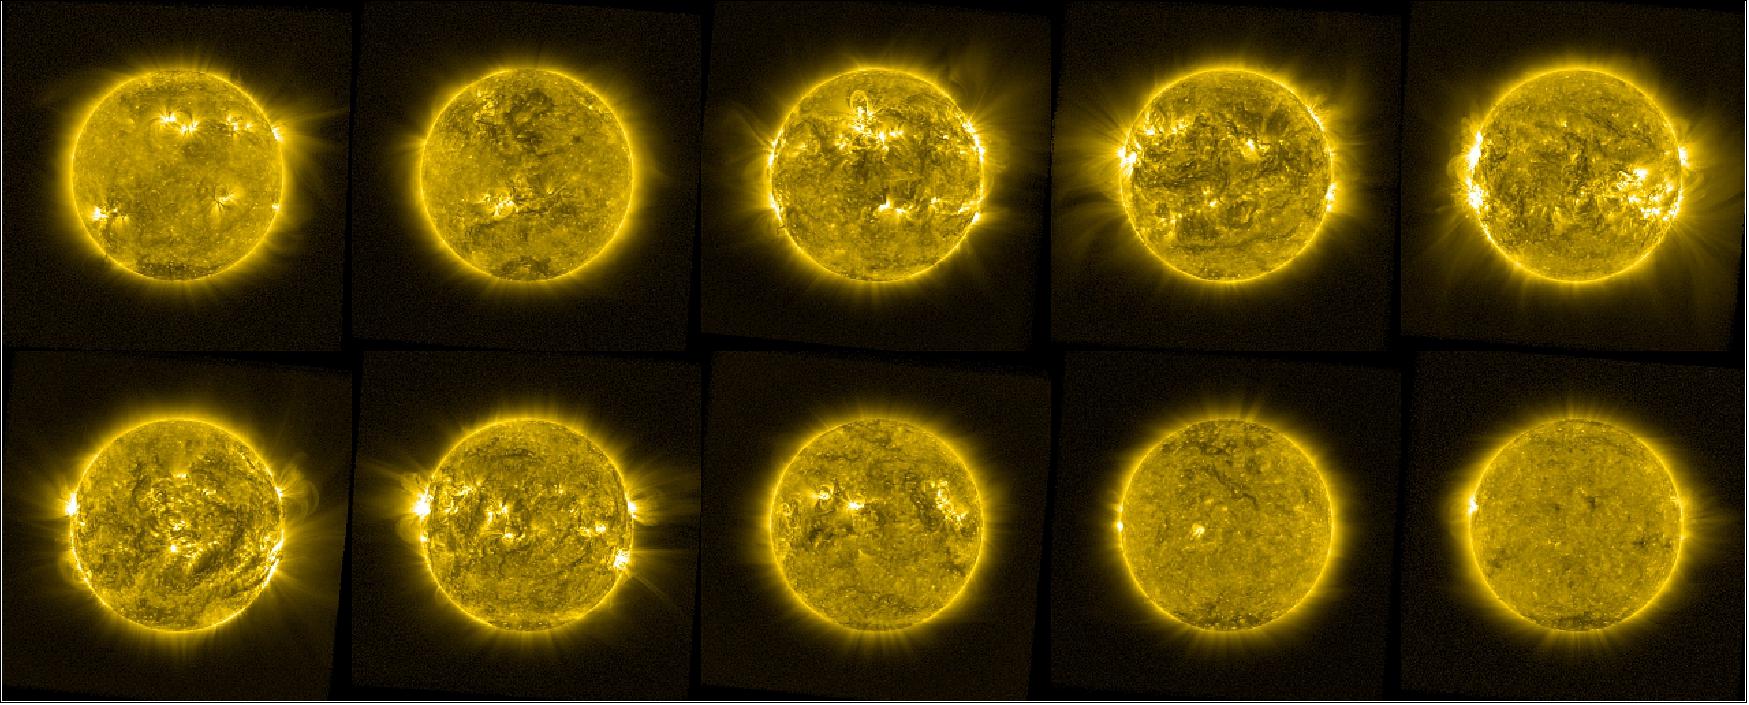 Figure 15: This image shows 10 different views of the Sun captured throughout PROBA-2's lifetime, processed to highlight the extended solar atmosphere – the part of the atmosphere that is visible around the main circular disc of the star. - The individual frames of the image shown here were captured on (top row, left to right): 20 February 2010, 1 February 2011, 20 January 2012, 5 February 2013, 28 January 2014, and (bottom row, left to right) 19 January 2015, 5 February 2016, 22 January 2017, 2 February 2018, and 1 February 2019 (image credit: ESA/Royal Observatory of Belgium)